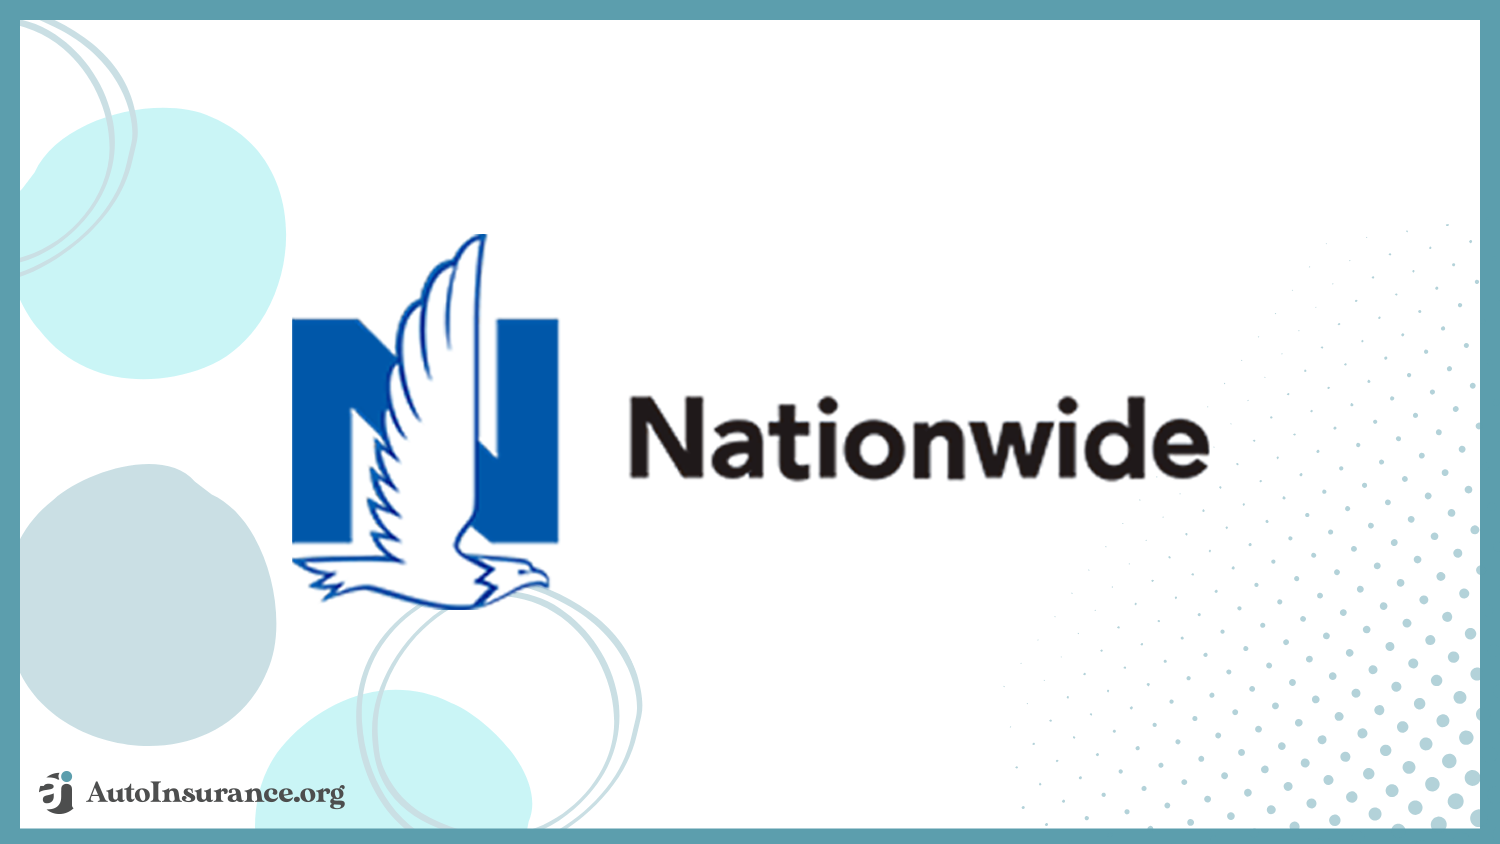 Nationwide: Best Auto Insurance for Drivers Under 25